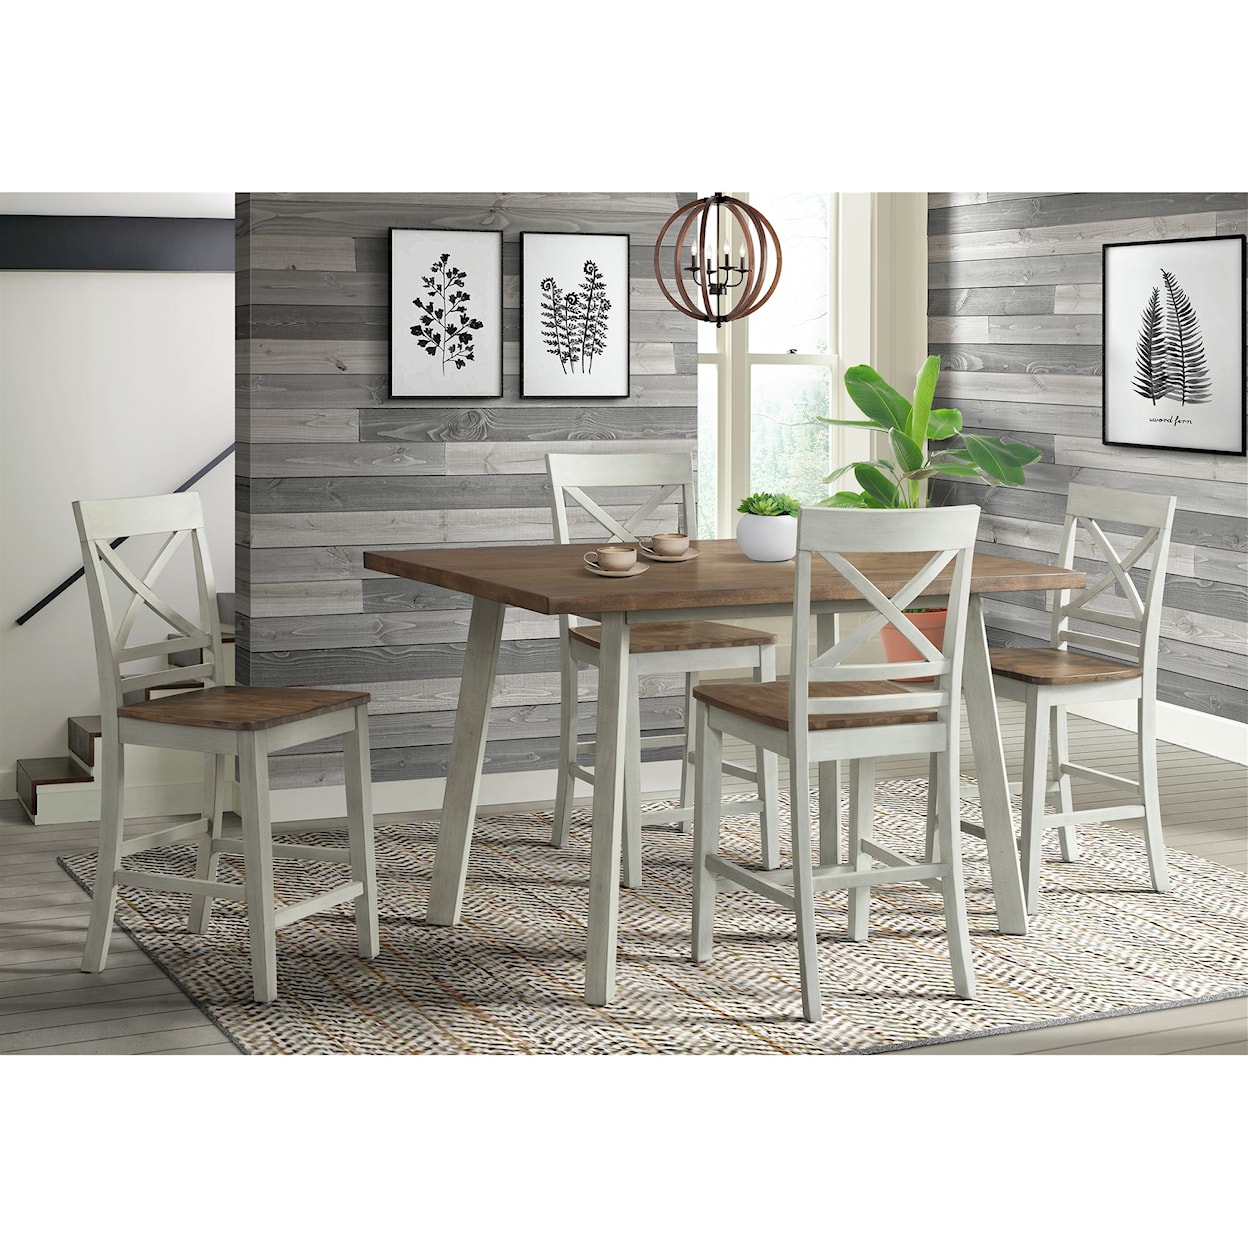 Elements International El Paso 5-Piece Counter Height Table and Chair Set